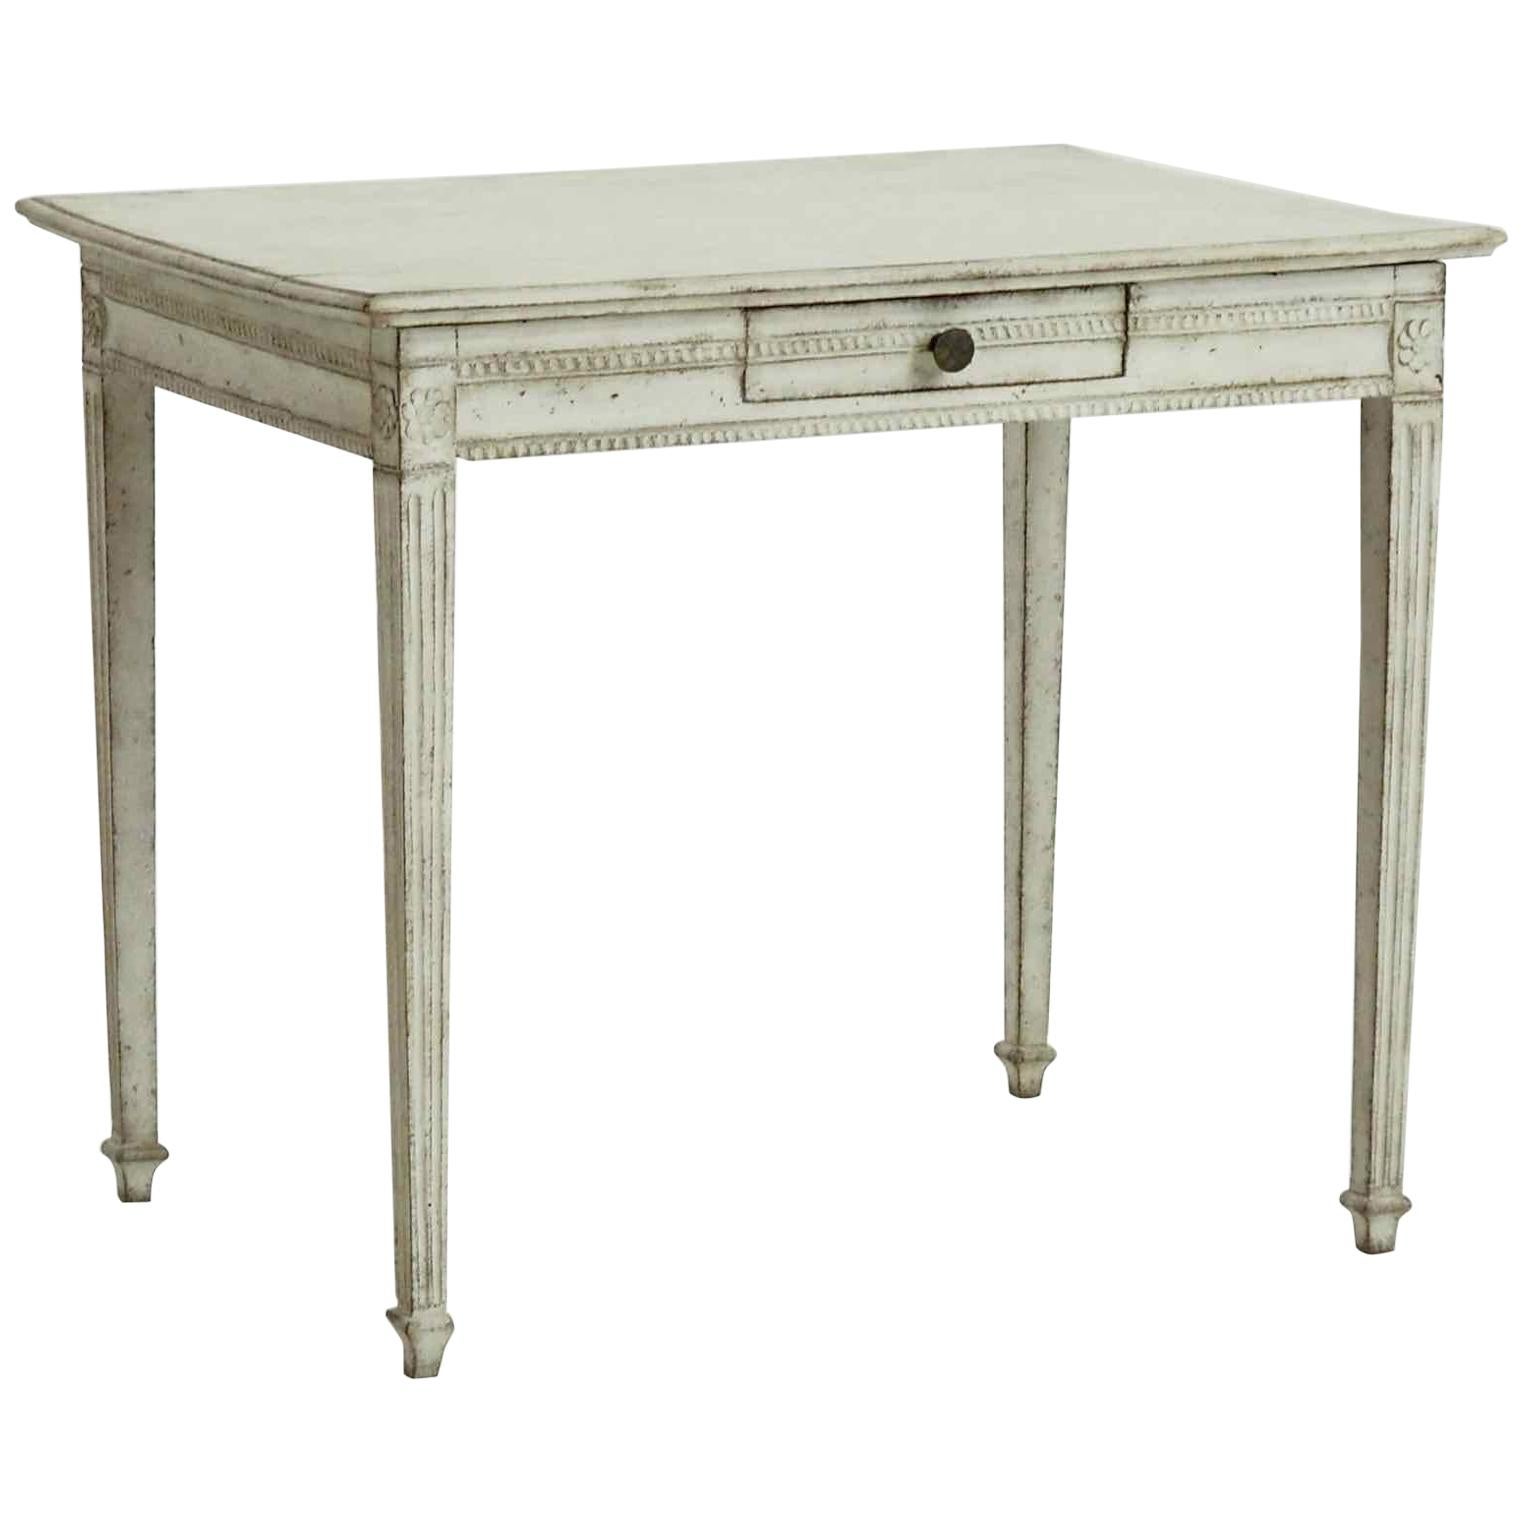 Freestanding Gustavian Console Table, with One Drawer, 1790